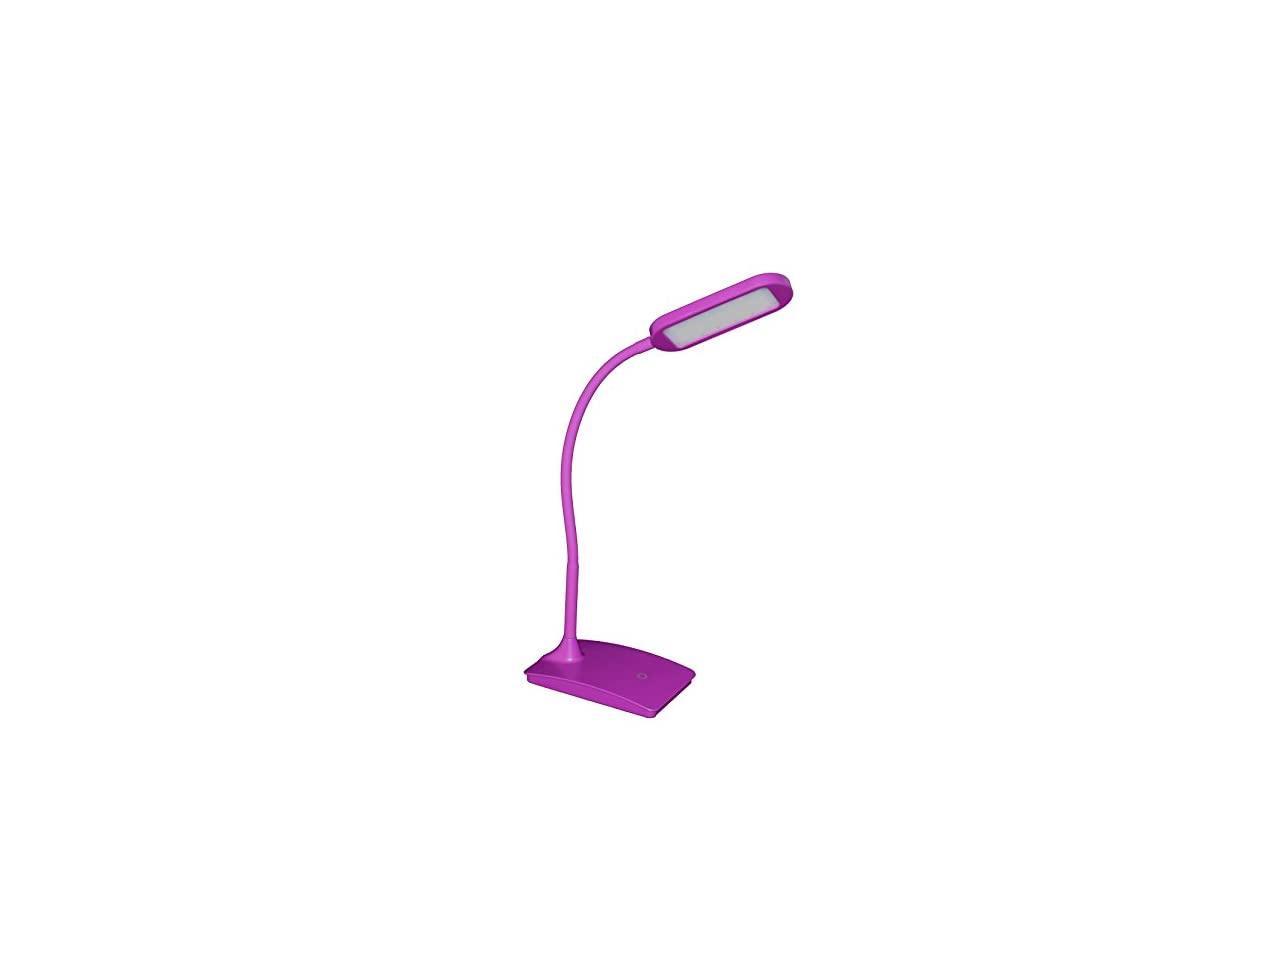 NEW IVY LED Desk Lamp w/ built-in USB charger in Bk Wh or Purple HOME/OFFICE 